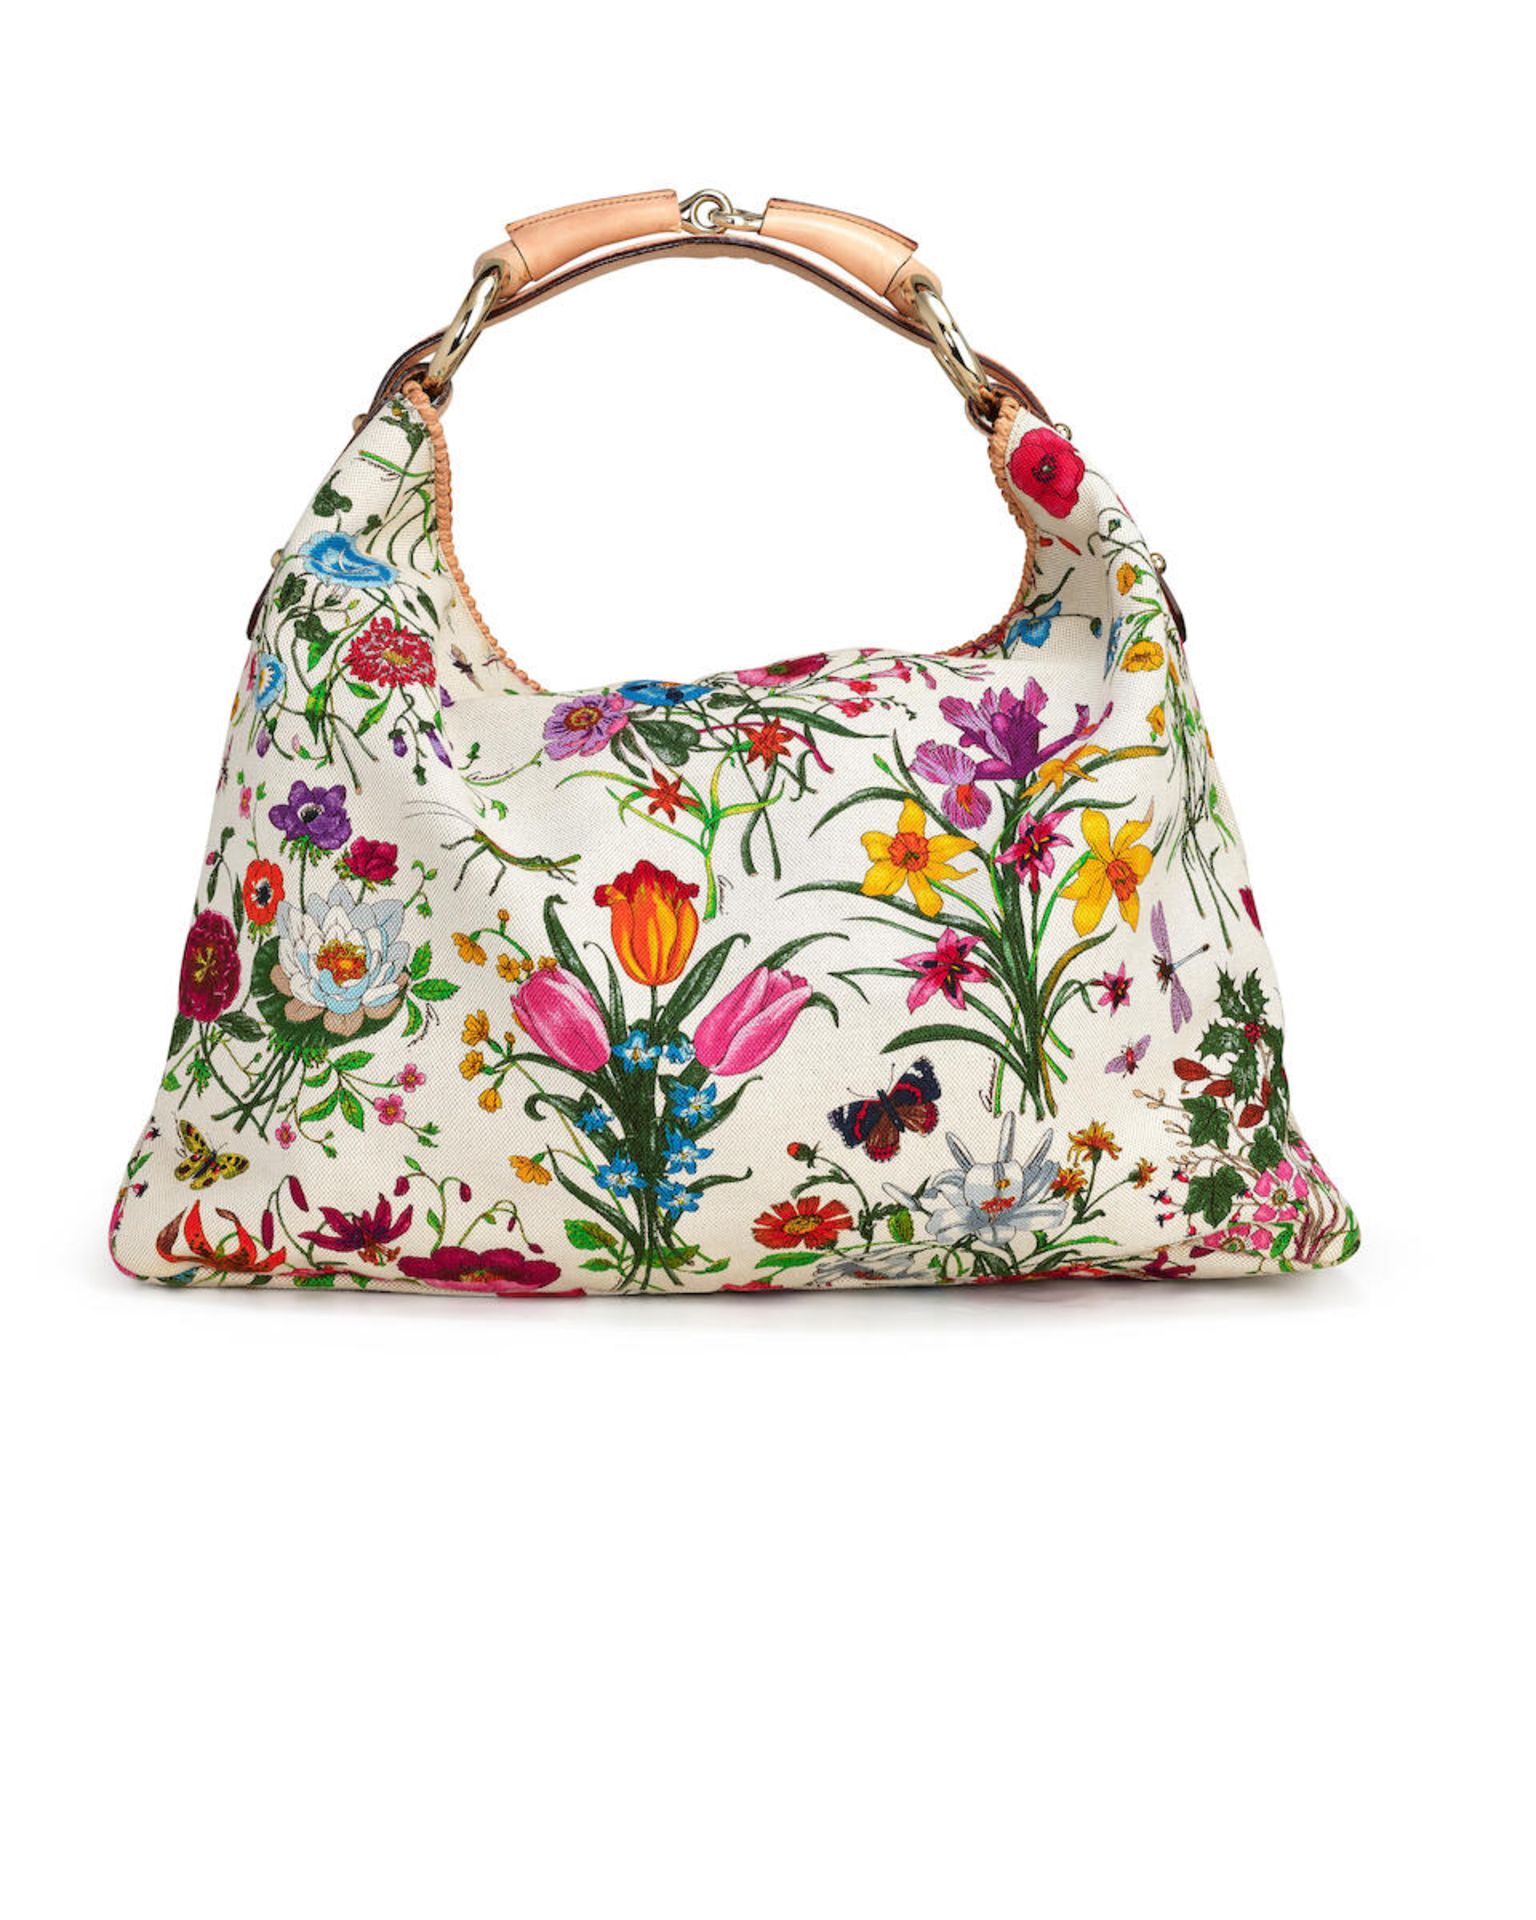 GUCCI: MULTI COLOURED CANVAS FLORAL HORSEBIT WITH LIGHT GOLD TONED HARDWARE (Includes original d...